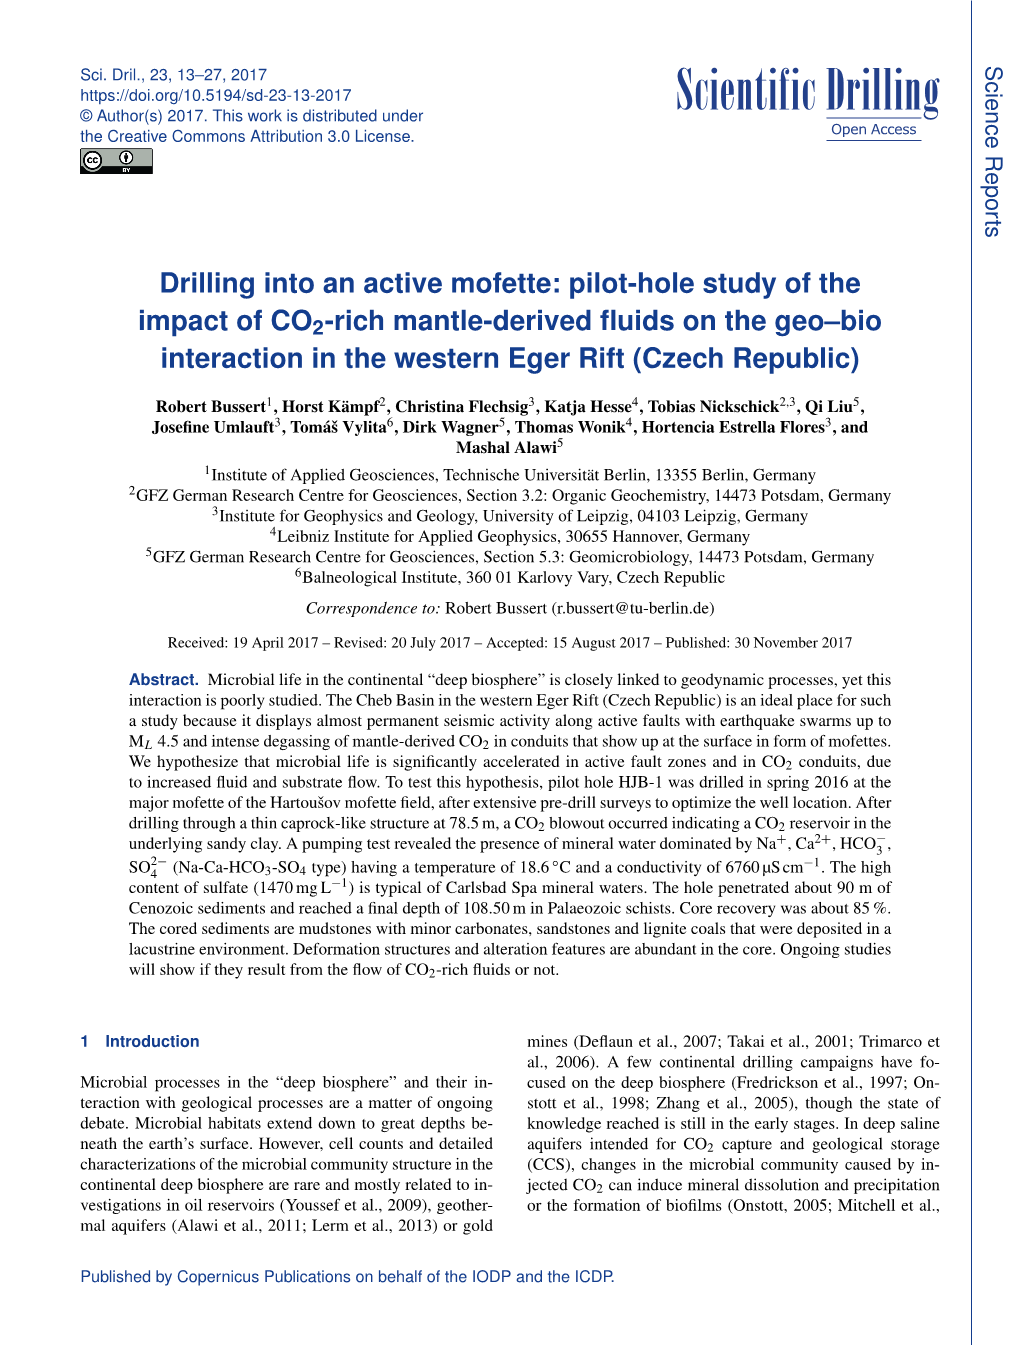 Drilling Into an Active Mofette: Pilot-Hole Study of the Impact of CO2-Rich Mantle-Derived ﬂuids on the Geo–Bio Interaction in the Western Eger Rift (Czech Republic)